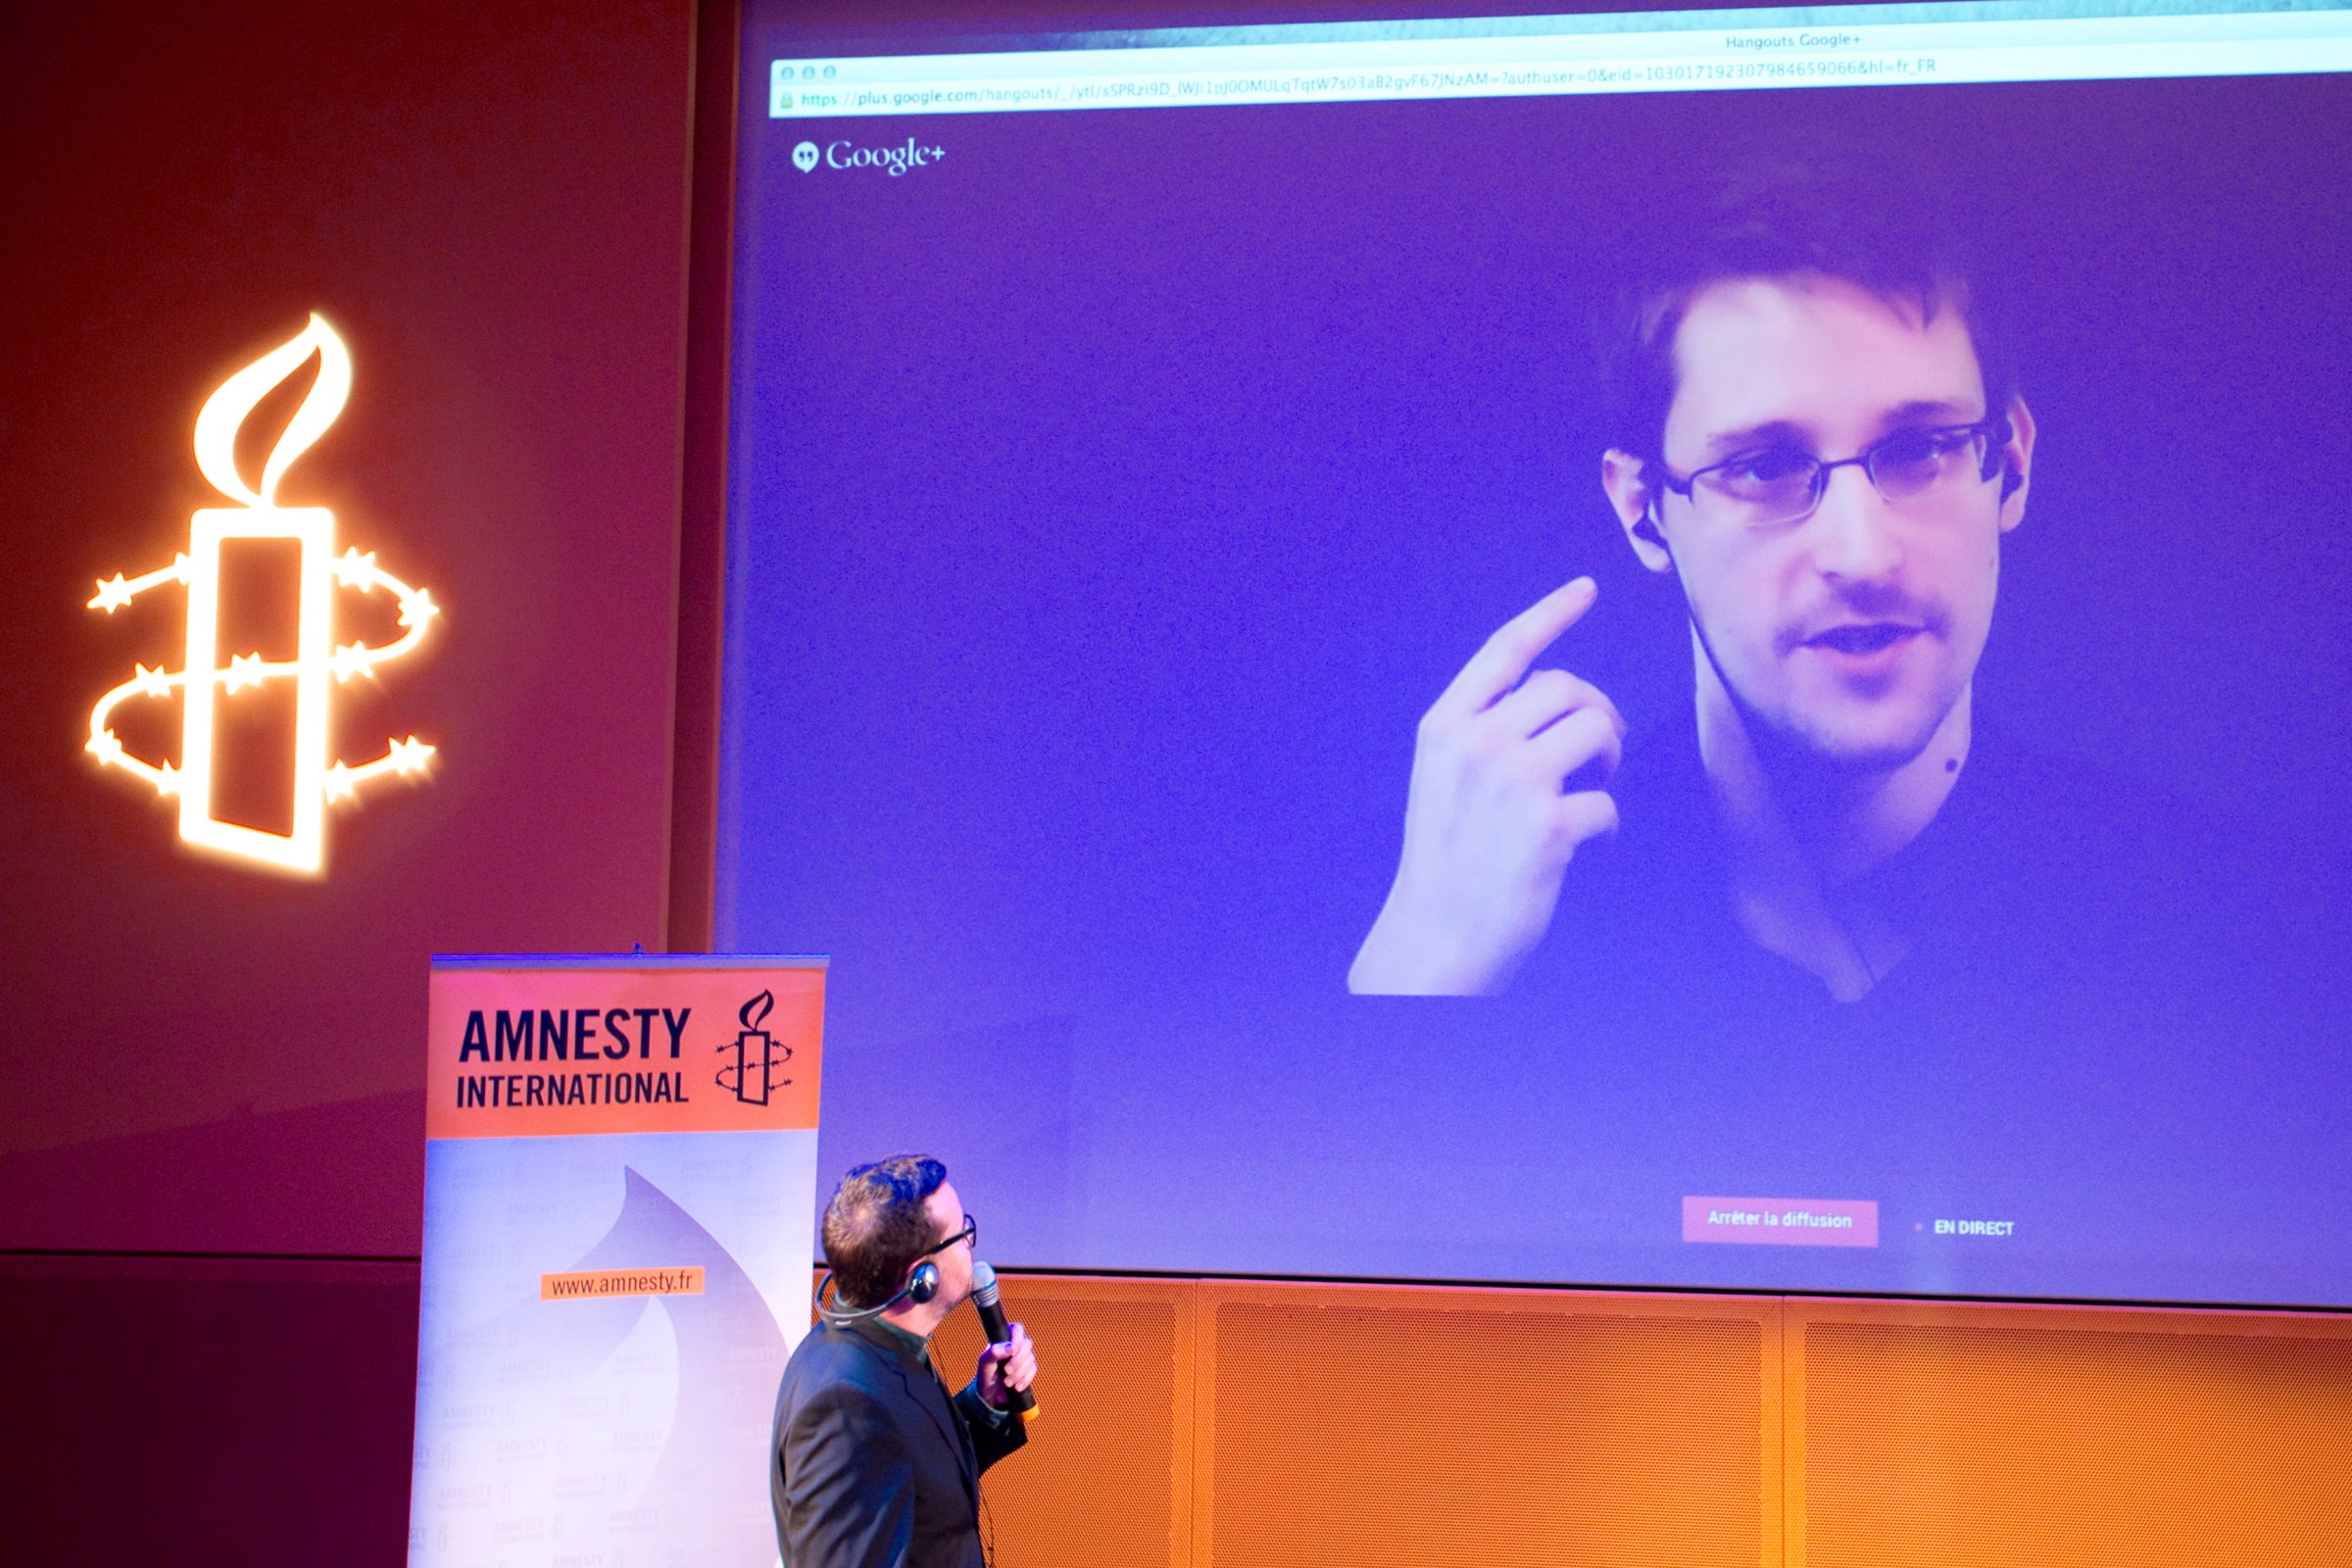 Former US National Security Agency contractor Edward Snowden, who is in Moscow, is seen on a giant screen during a live video conference for an interview as part of Amnesty International's annual Write for Rights campaign at the Gaite Lyrique in Paris